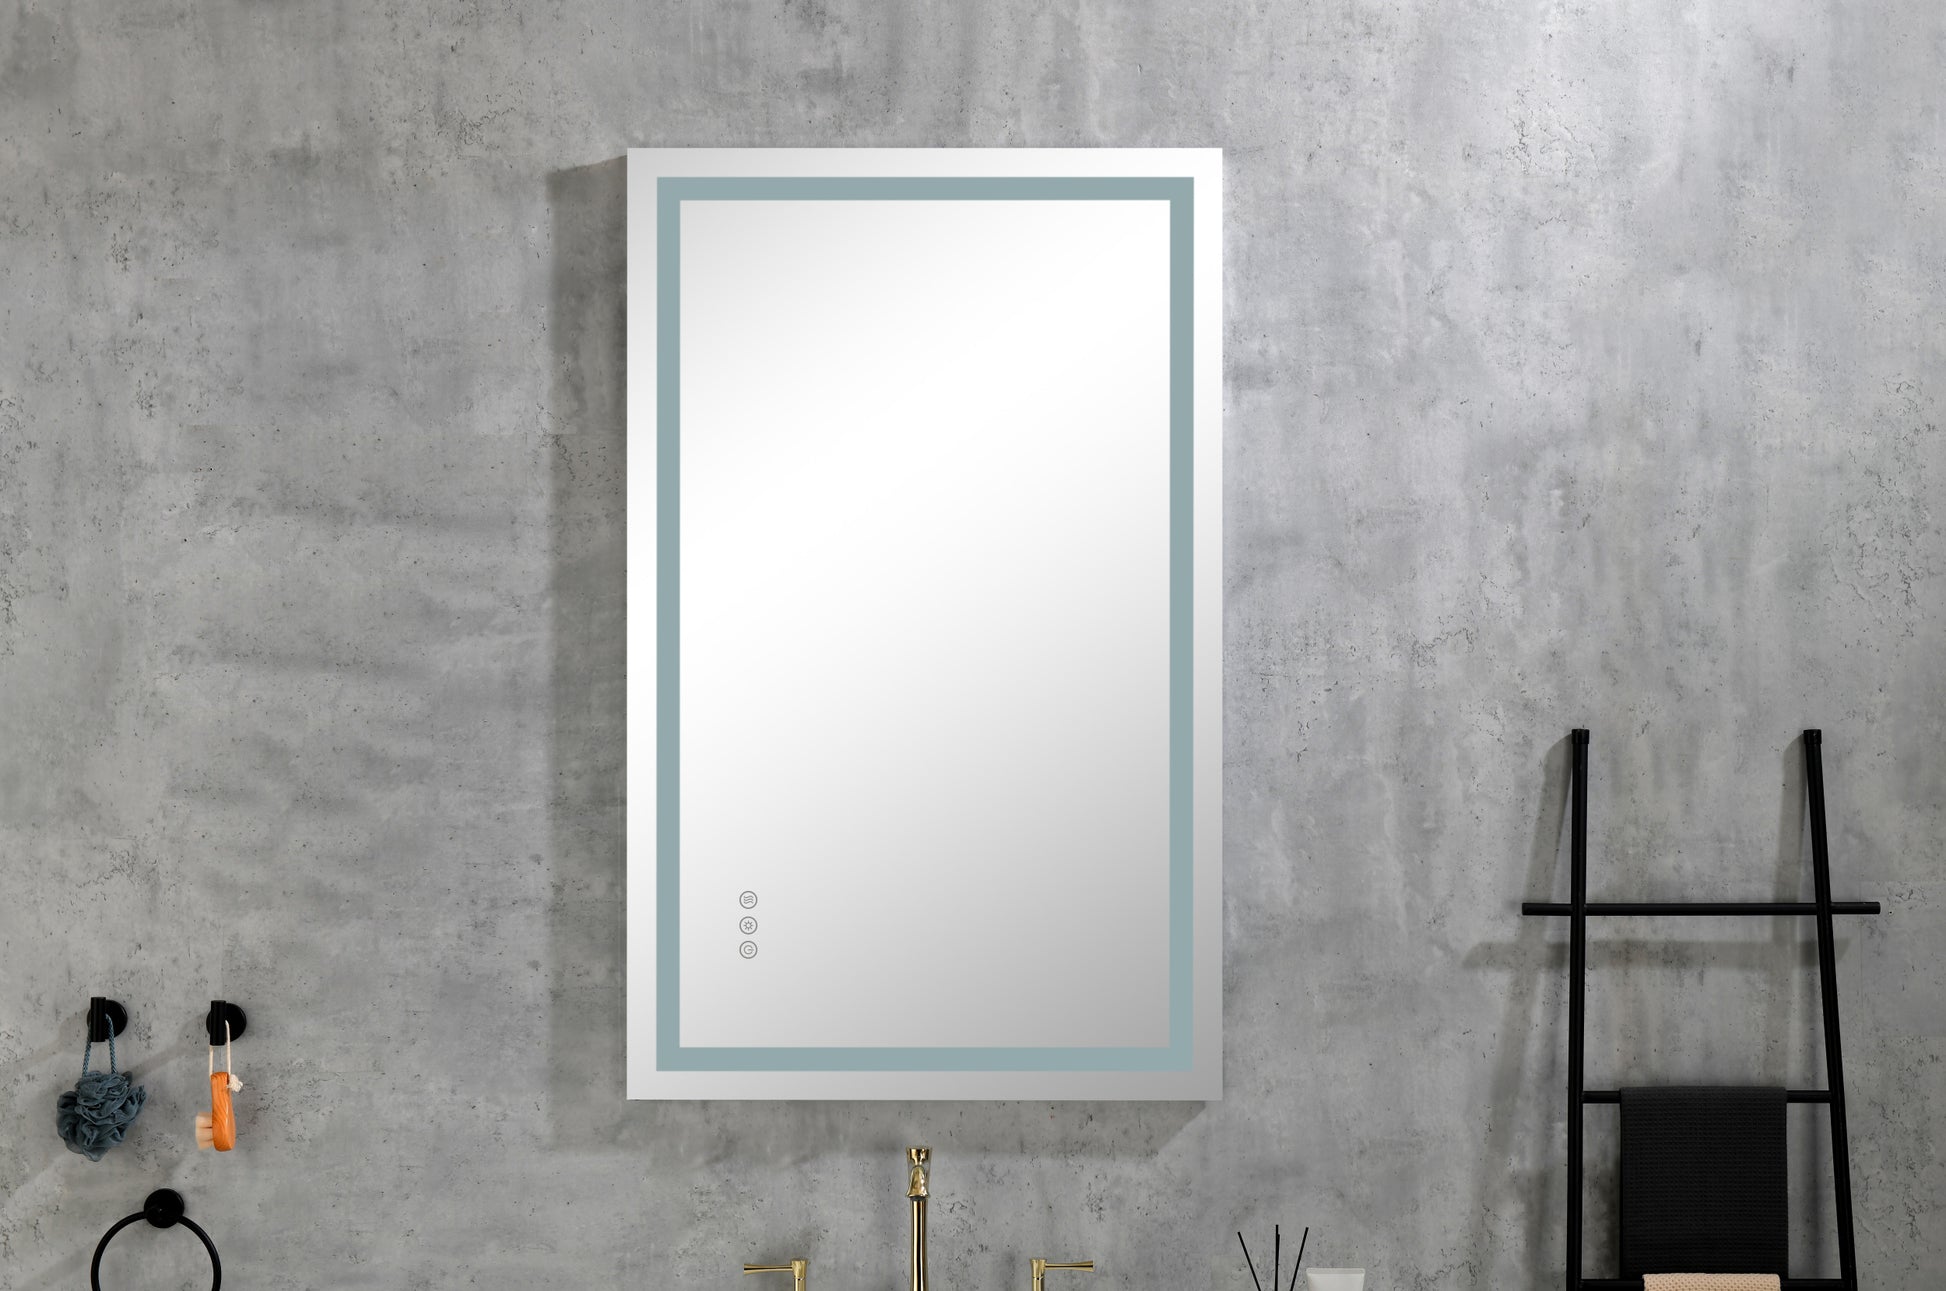 Led Bathroom Mirror 40 "x 32" with Front and